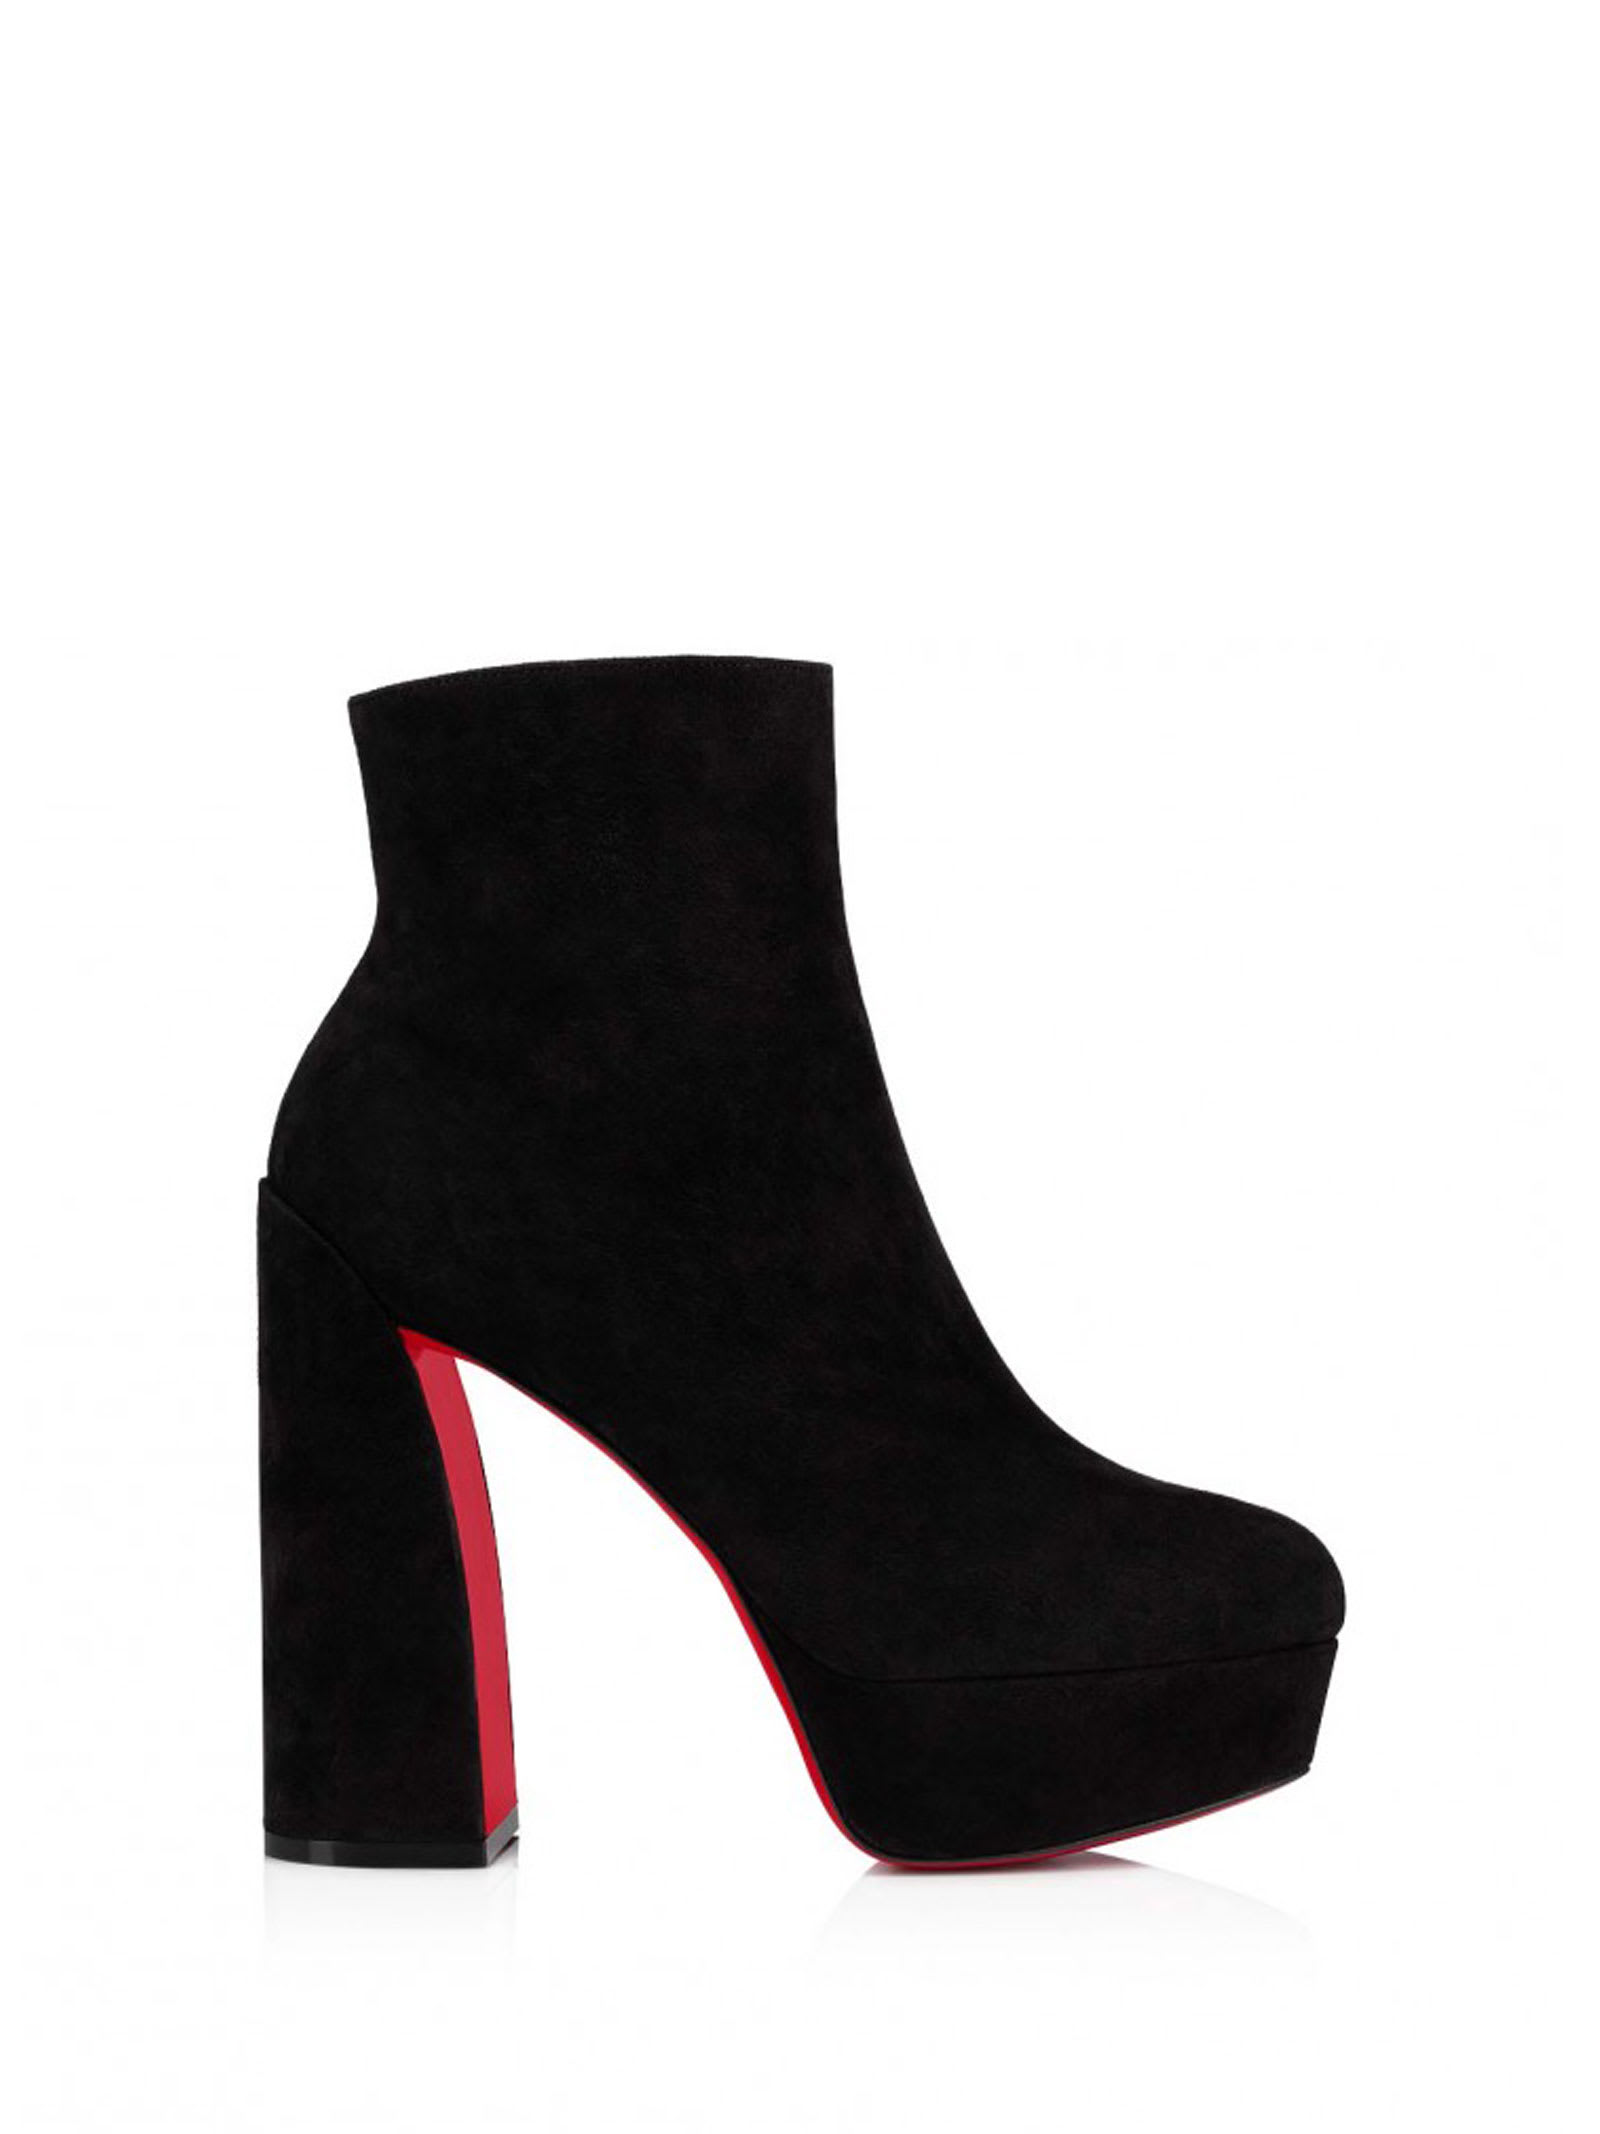 Christian Louboutin Movida Black Suede Ankle Boot